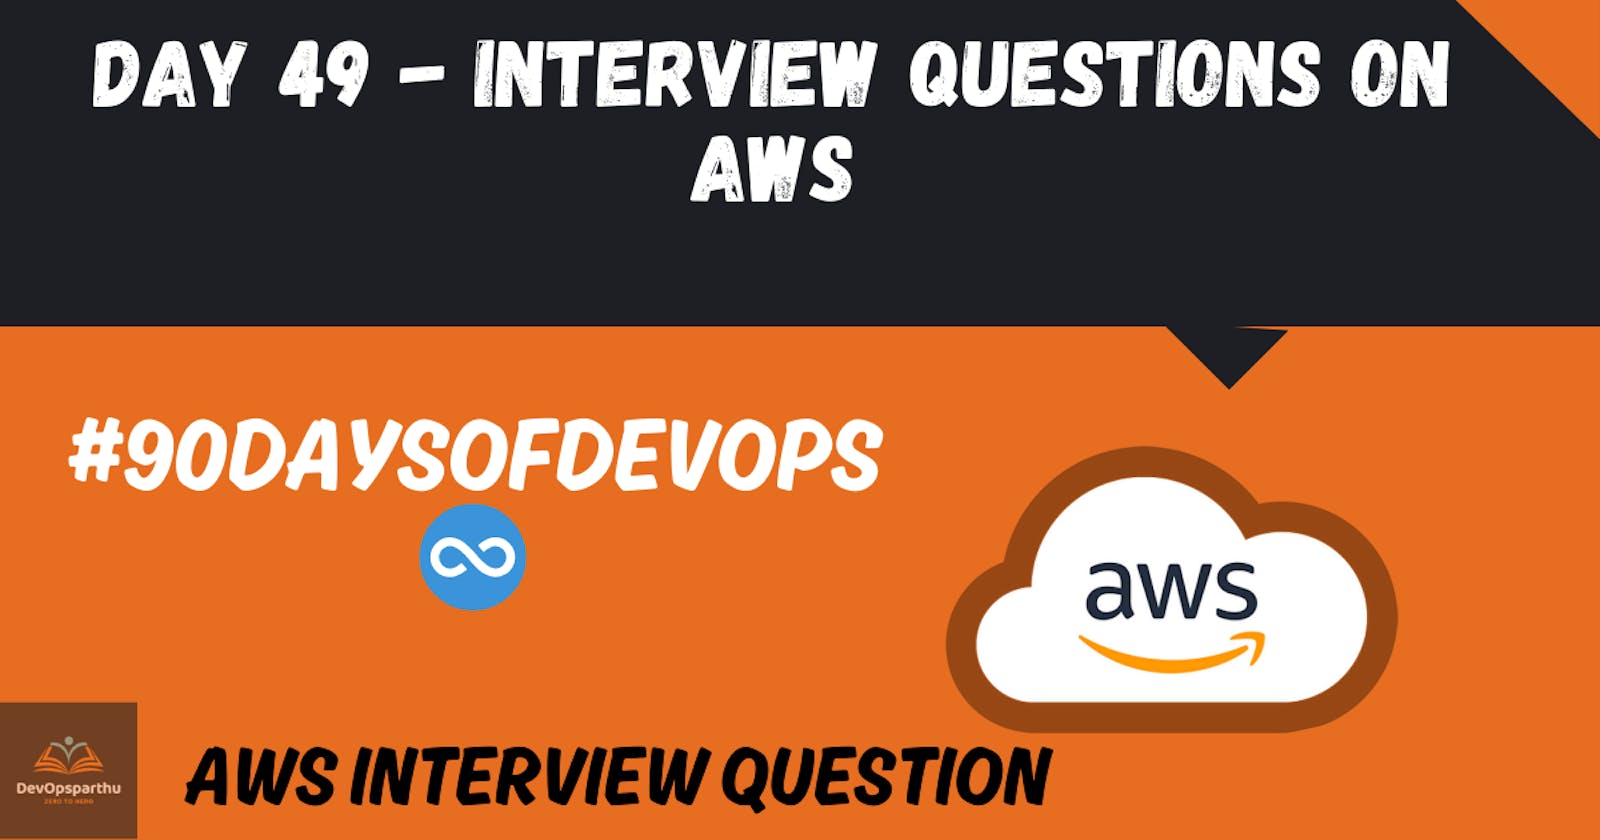 Day 49 - INTERVIEW QUESTIONS ON AWS